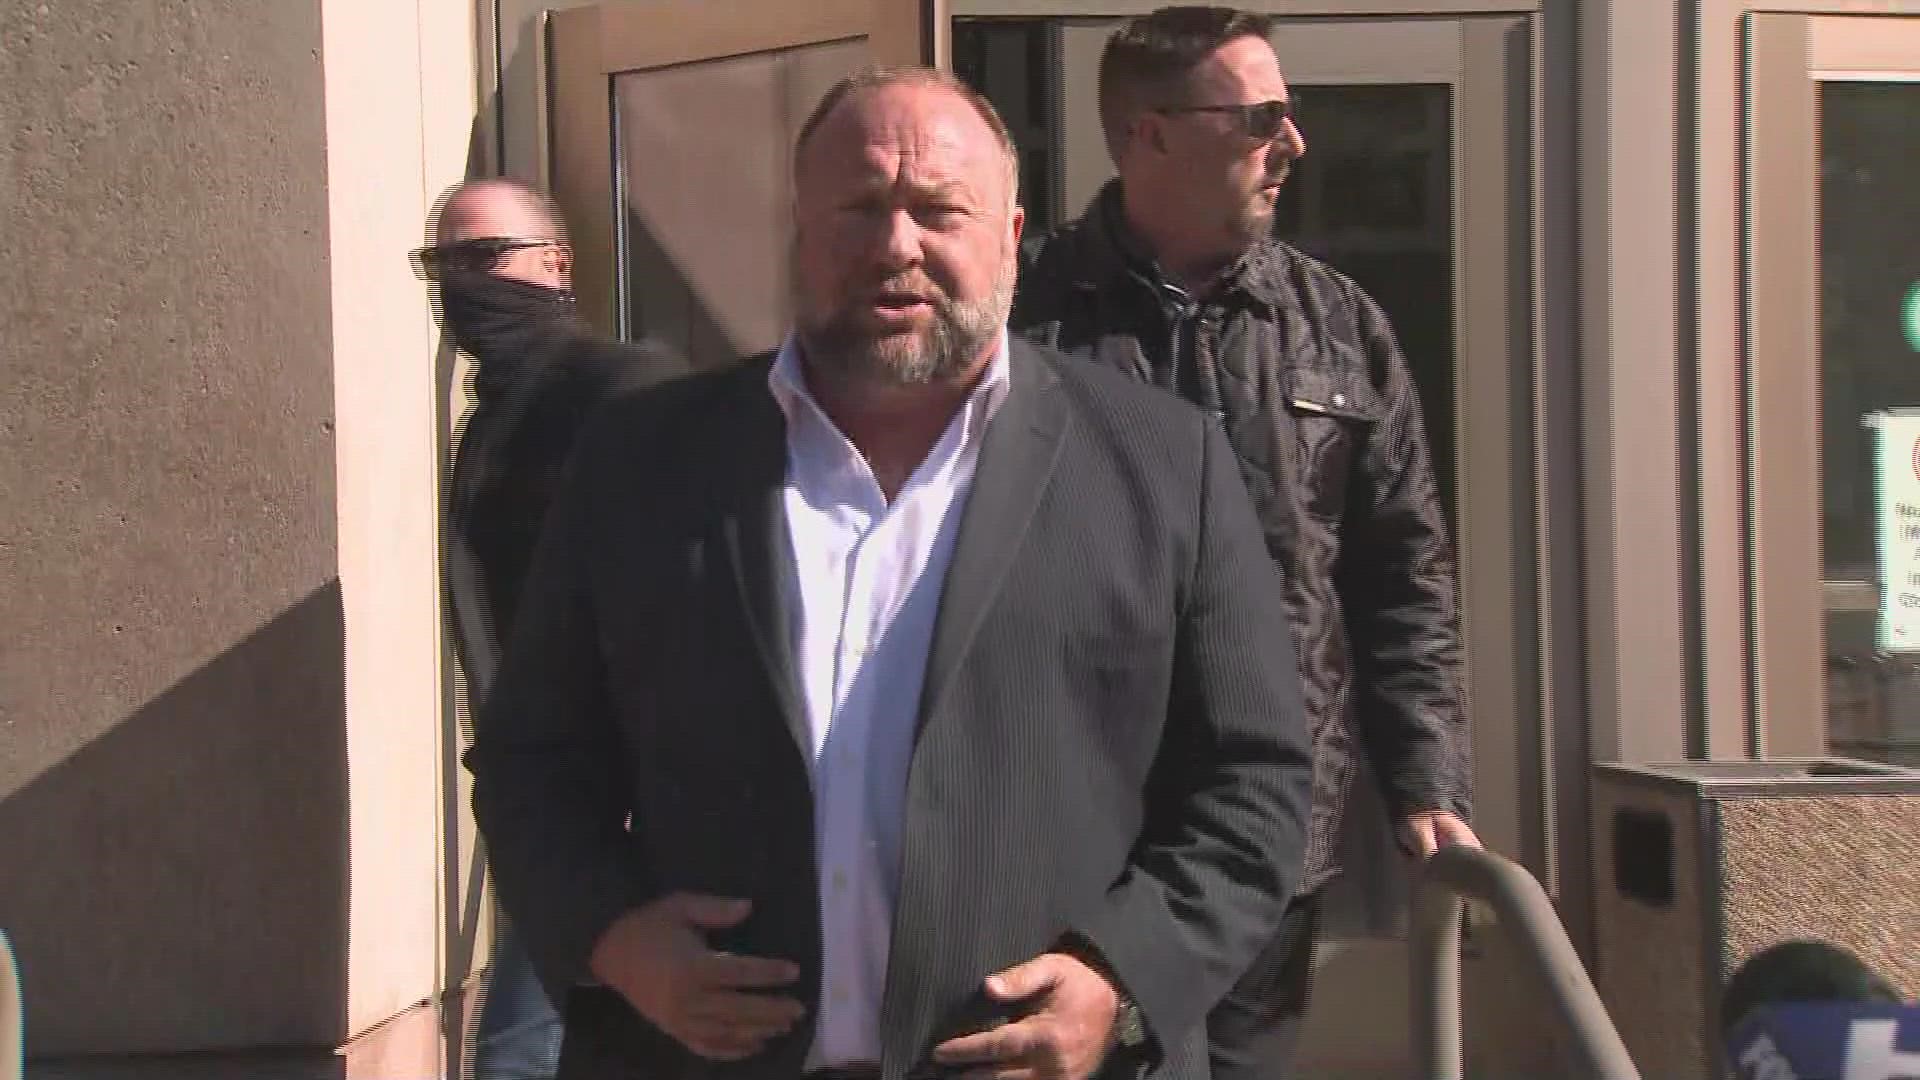 Alex Jones spoke to the media during the Friday morning recess of the defamation trial into his claims that the Sandy Hook shooting was a hoax.